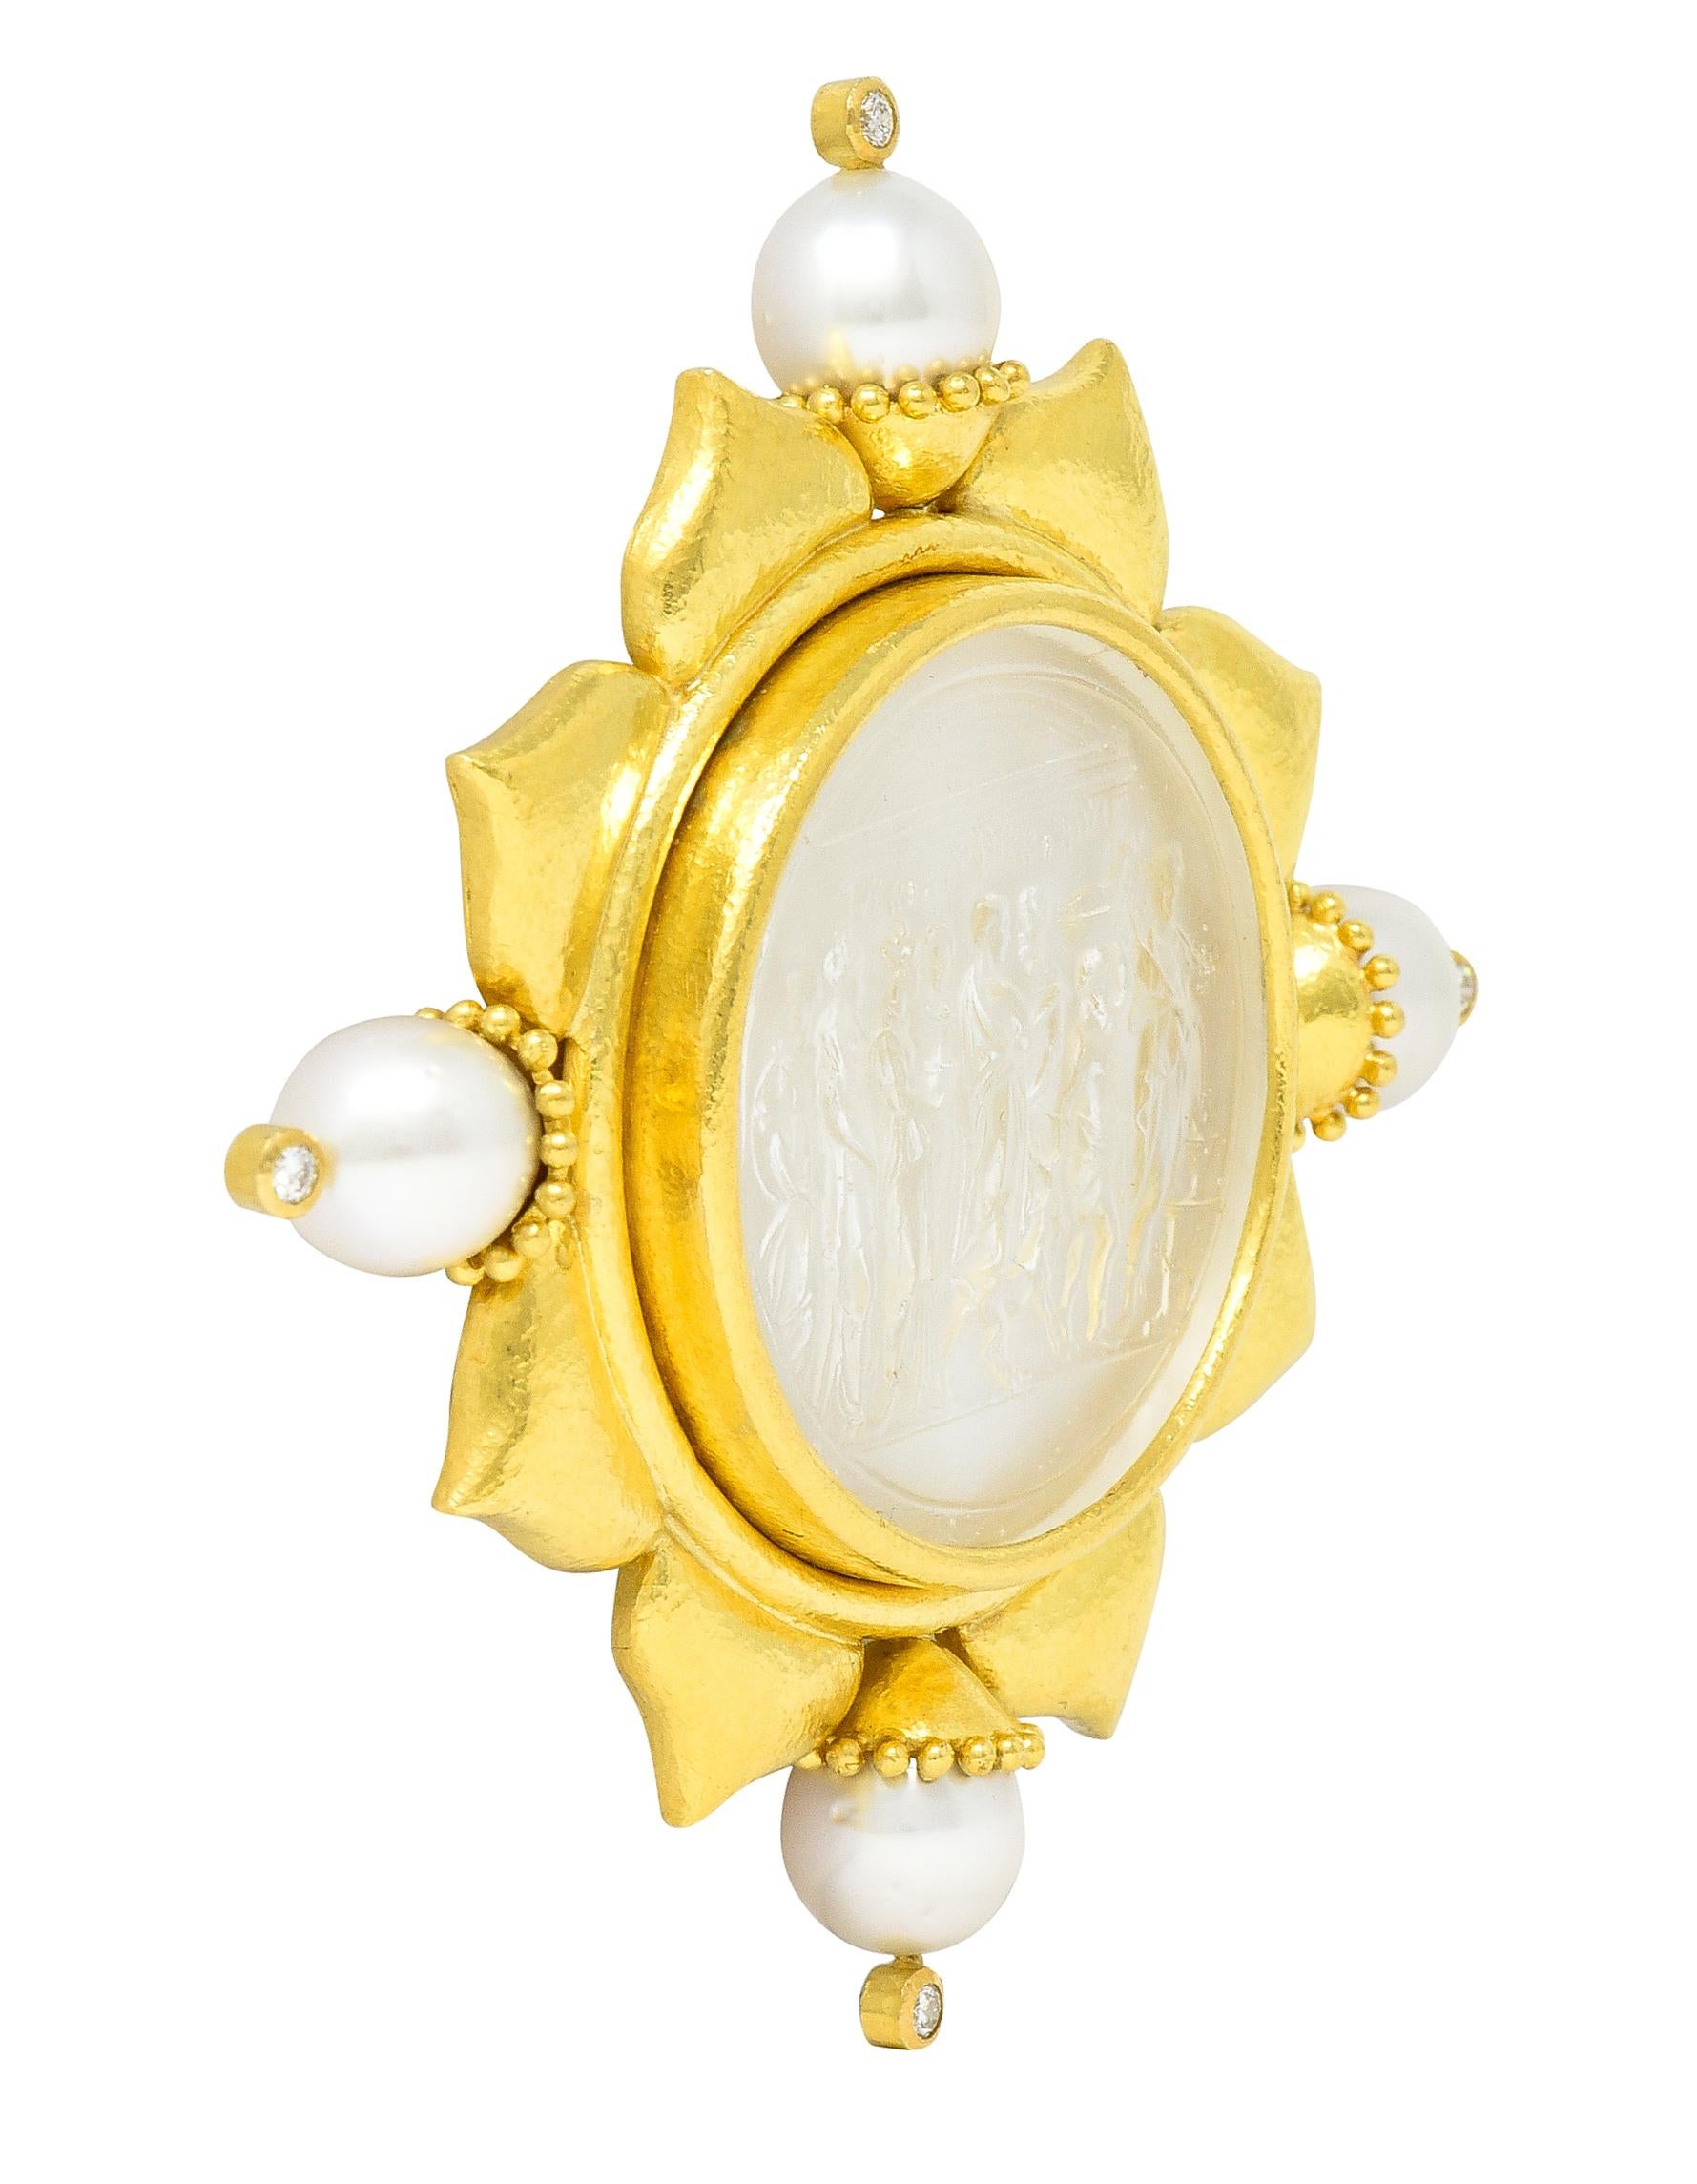 Centering a 39.0 mm round Venetian glass cameo - depicting nine robed figures carrying baskets with goats walking alongside. Transparent colorless and backed by mother-of-pearl - white body color with moderate iridescence. Bezel set with hammered